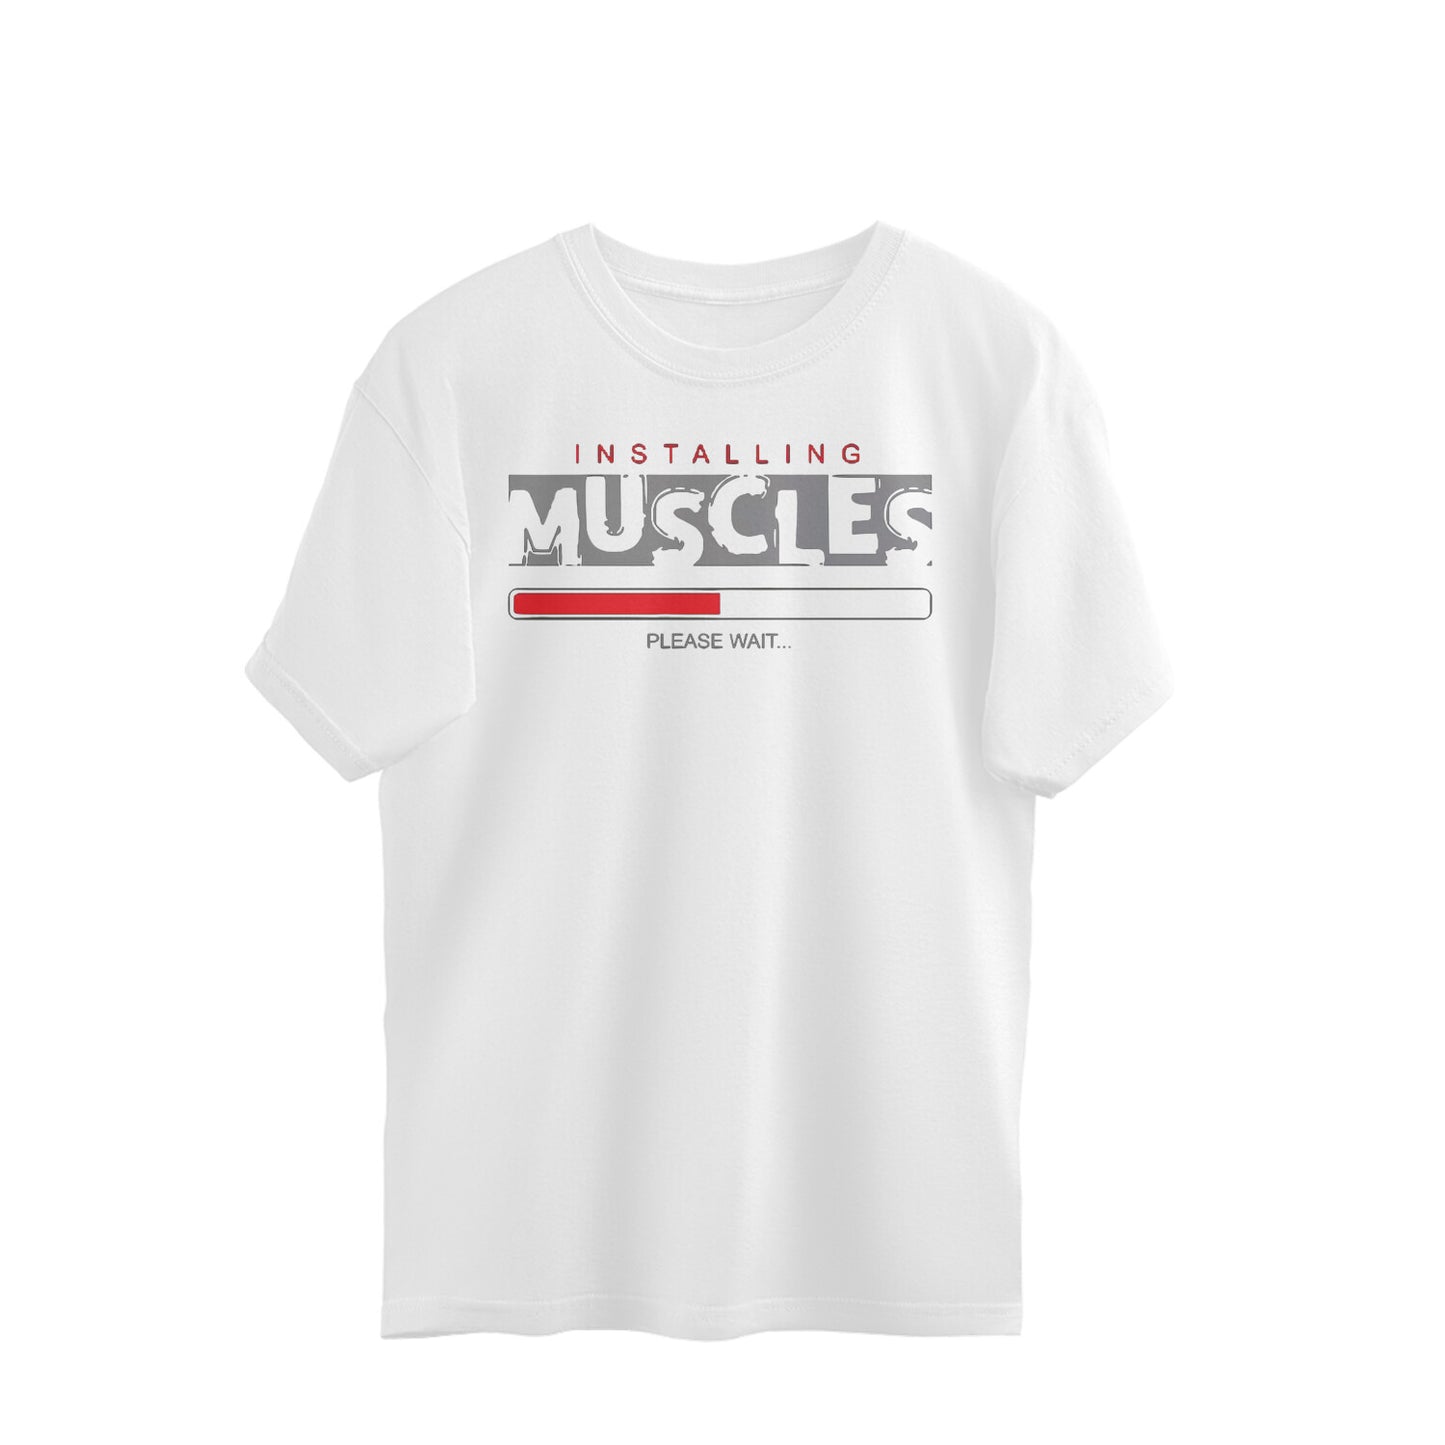 Muscles Over Sized T-Shirt